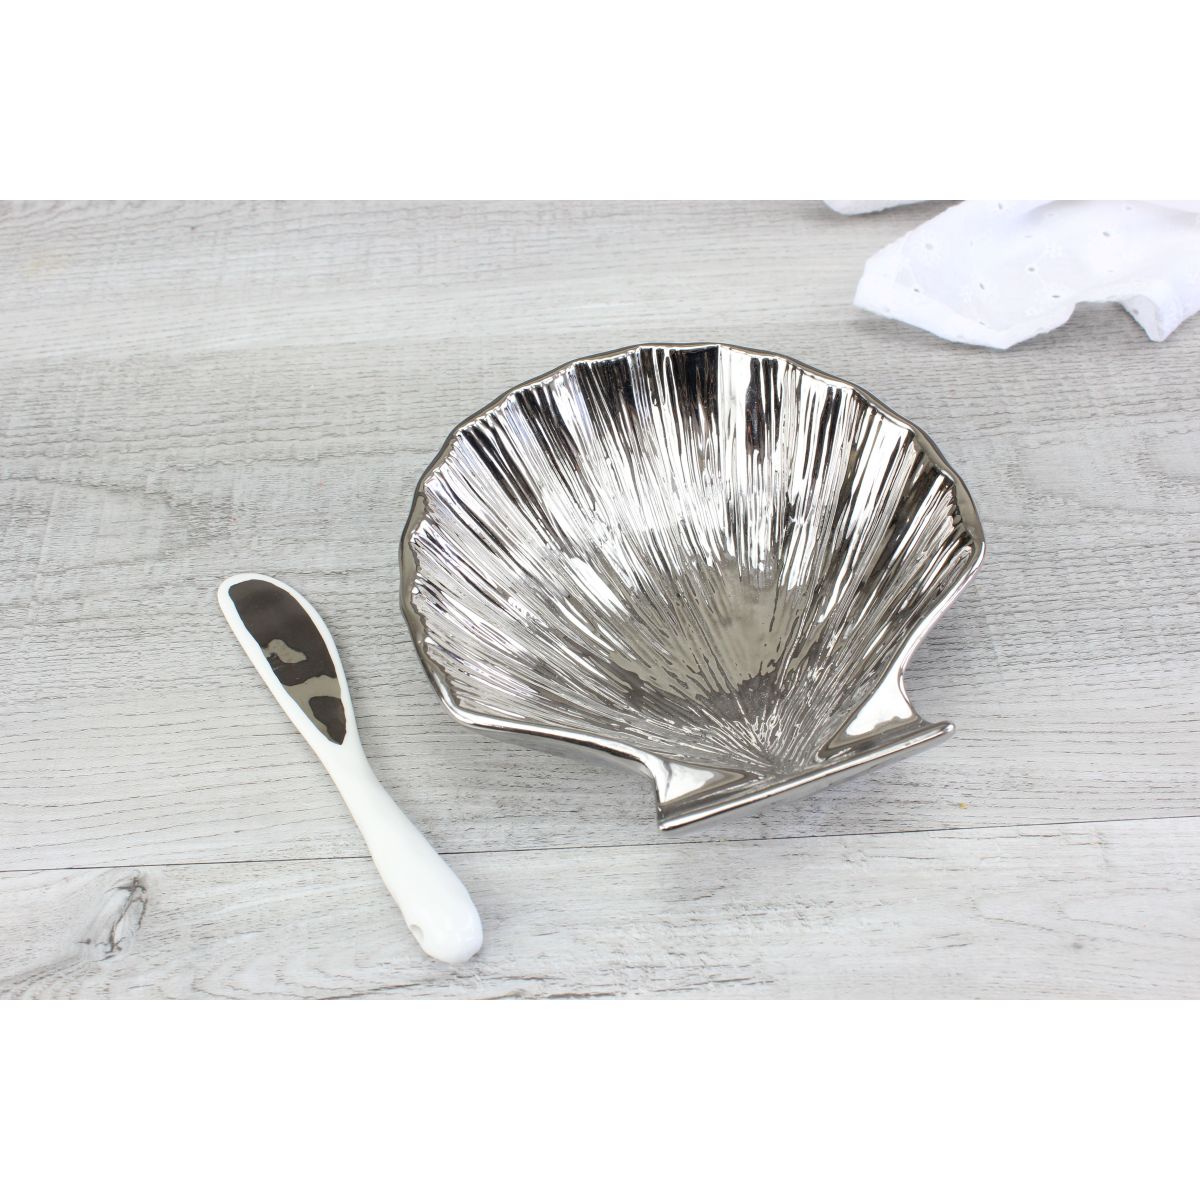 Pampa Bay Get Gifty - The Shell Procelain Set - Dish and Spoon